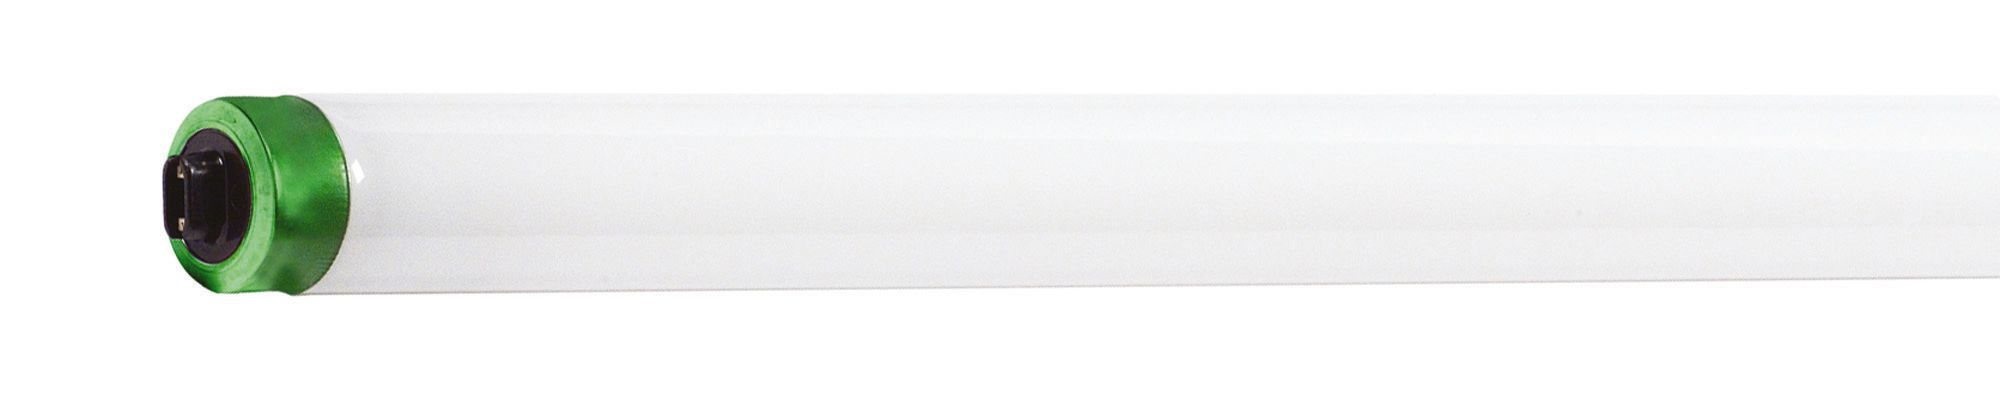 236885 (F96T8/TL841/HO/PLUS/ALTO) Linear Fluorescent Lamp Philips Lighting;Signify Lamps